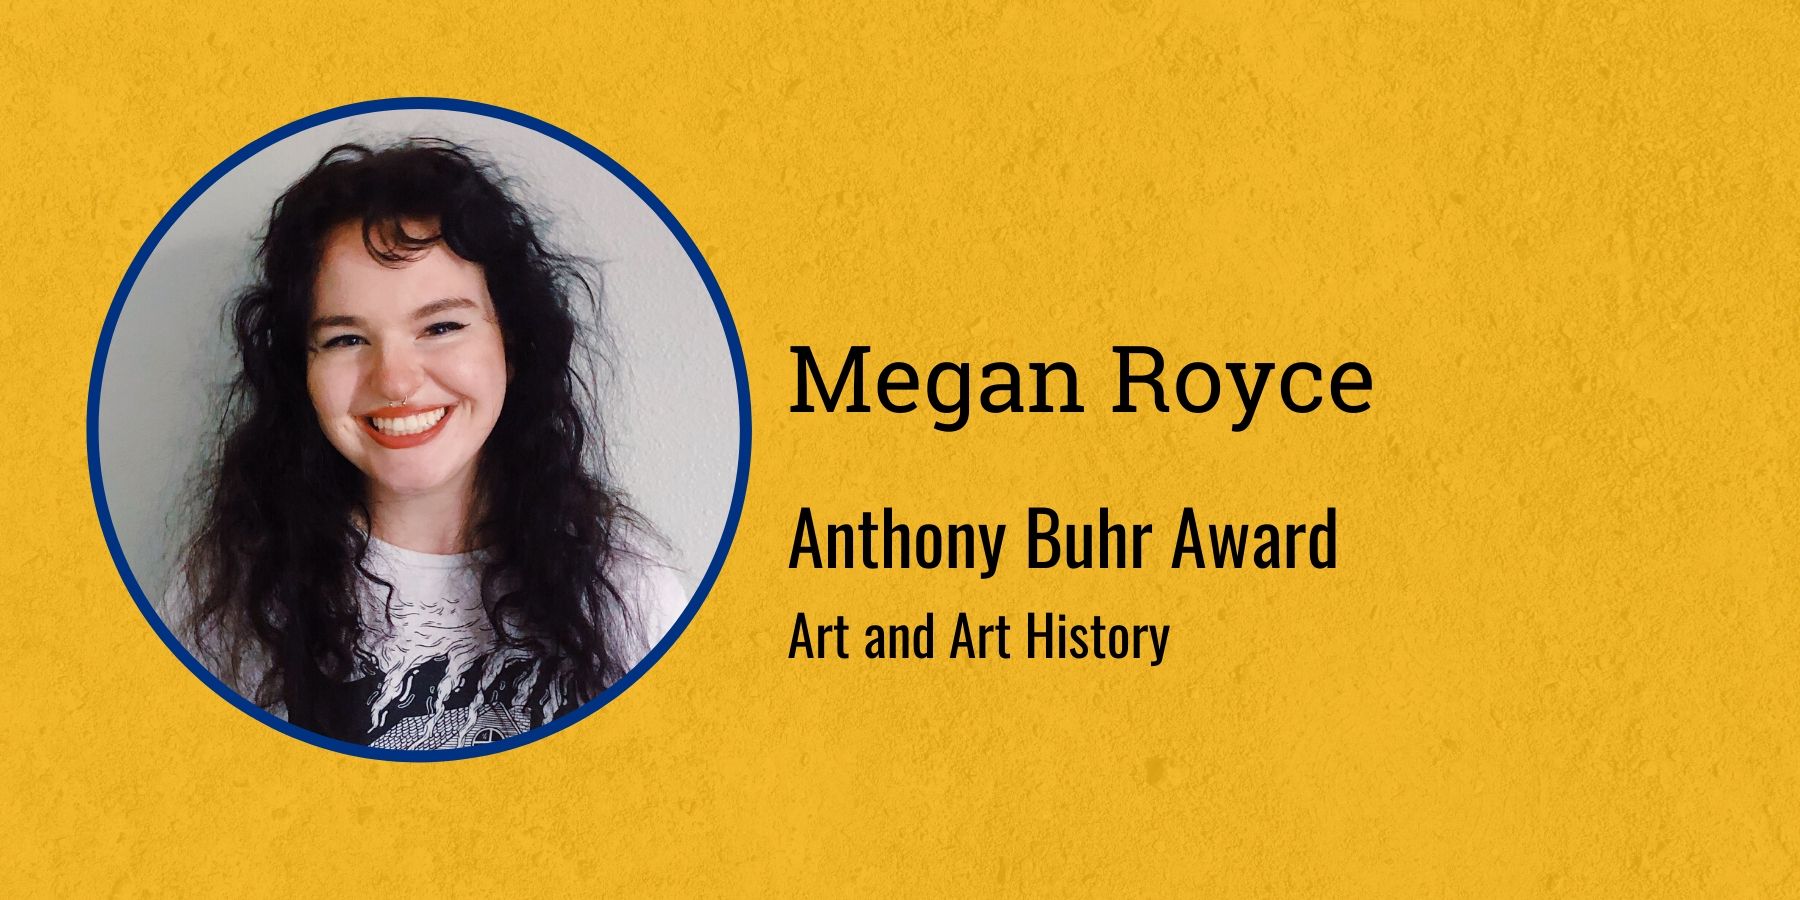 Photo of Megan Royce and text Anthony Buhr Award, Art and Art History